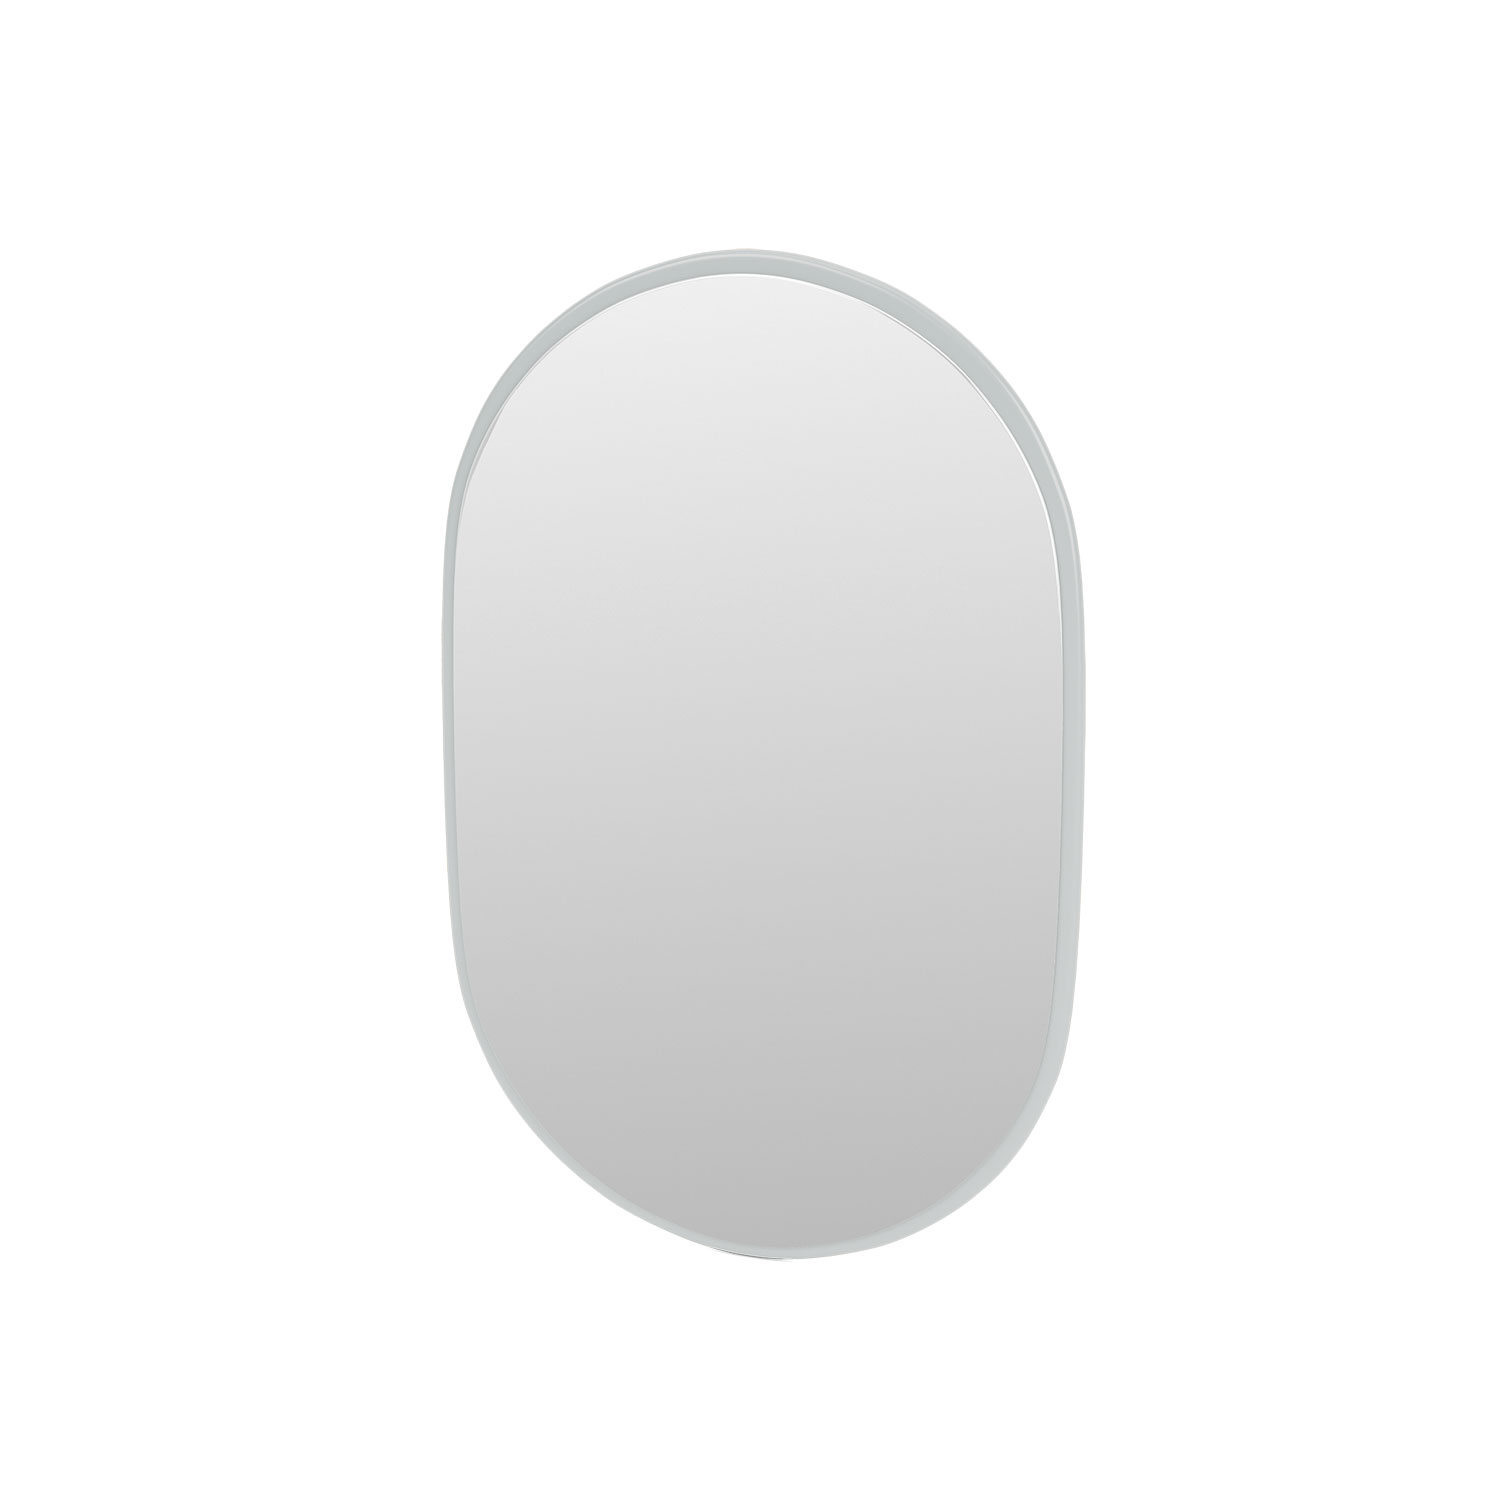 LOOK oval mirror, Oyster